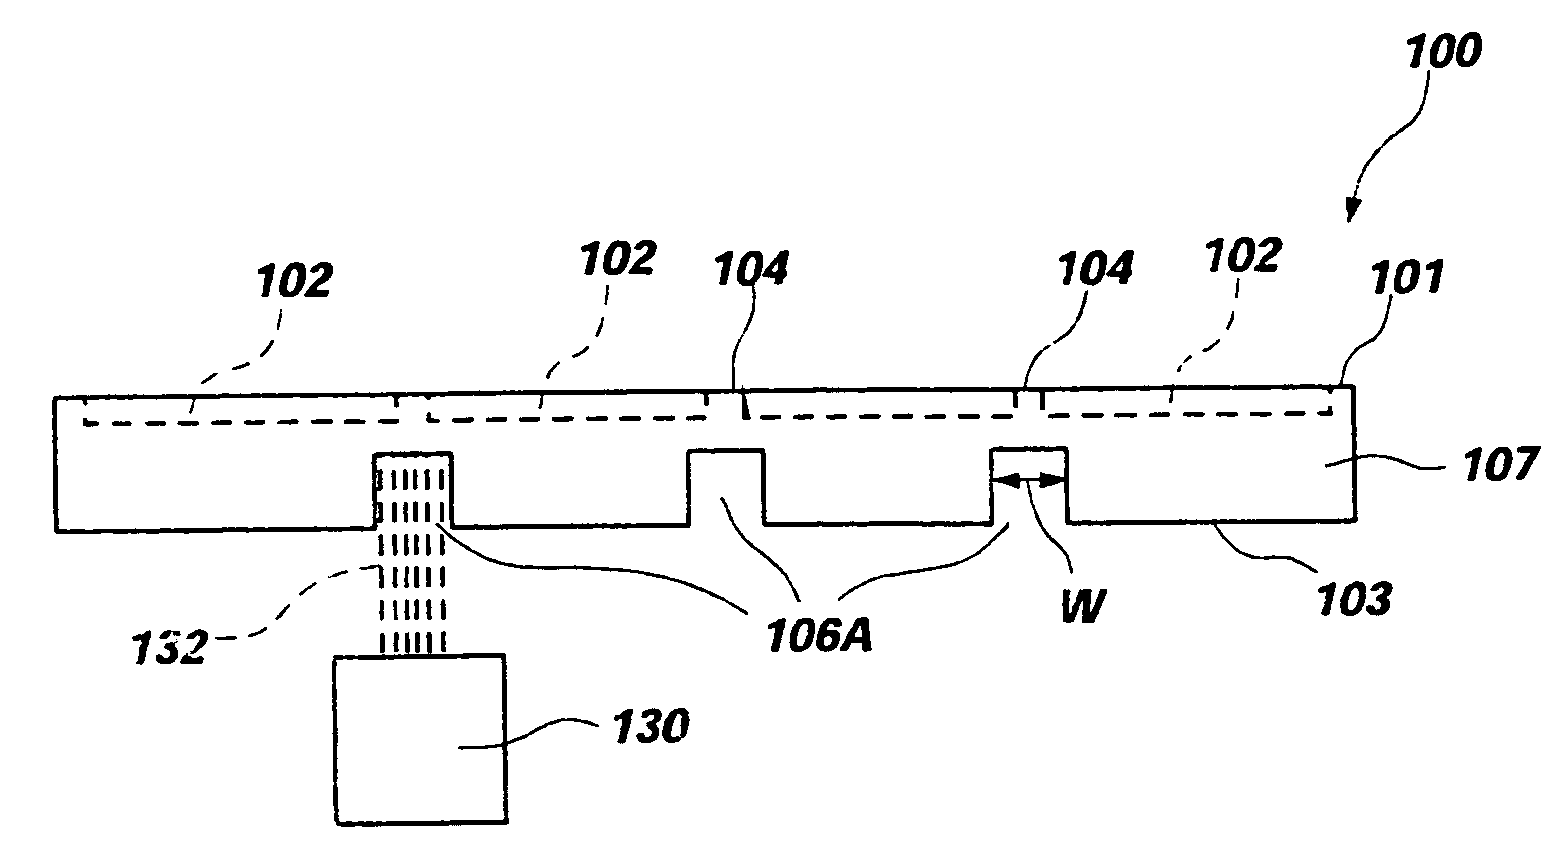 Methods relating to singulating semiconductor wafers and wafer scale assemblies